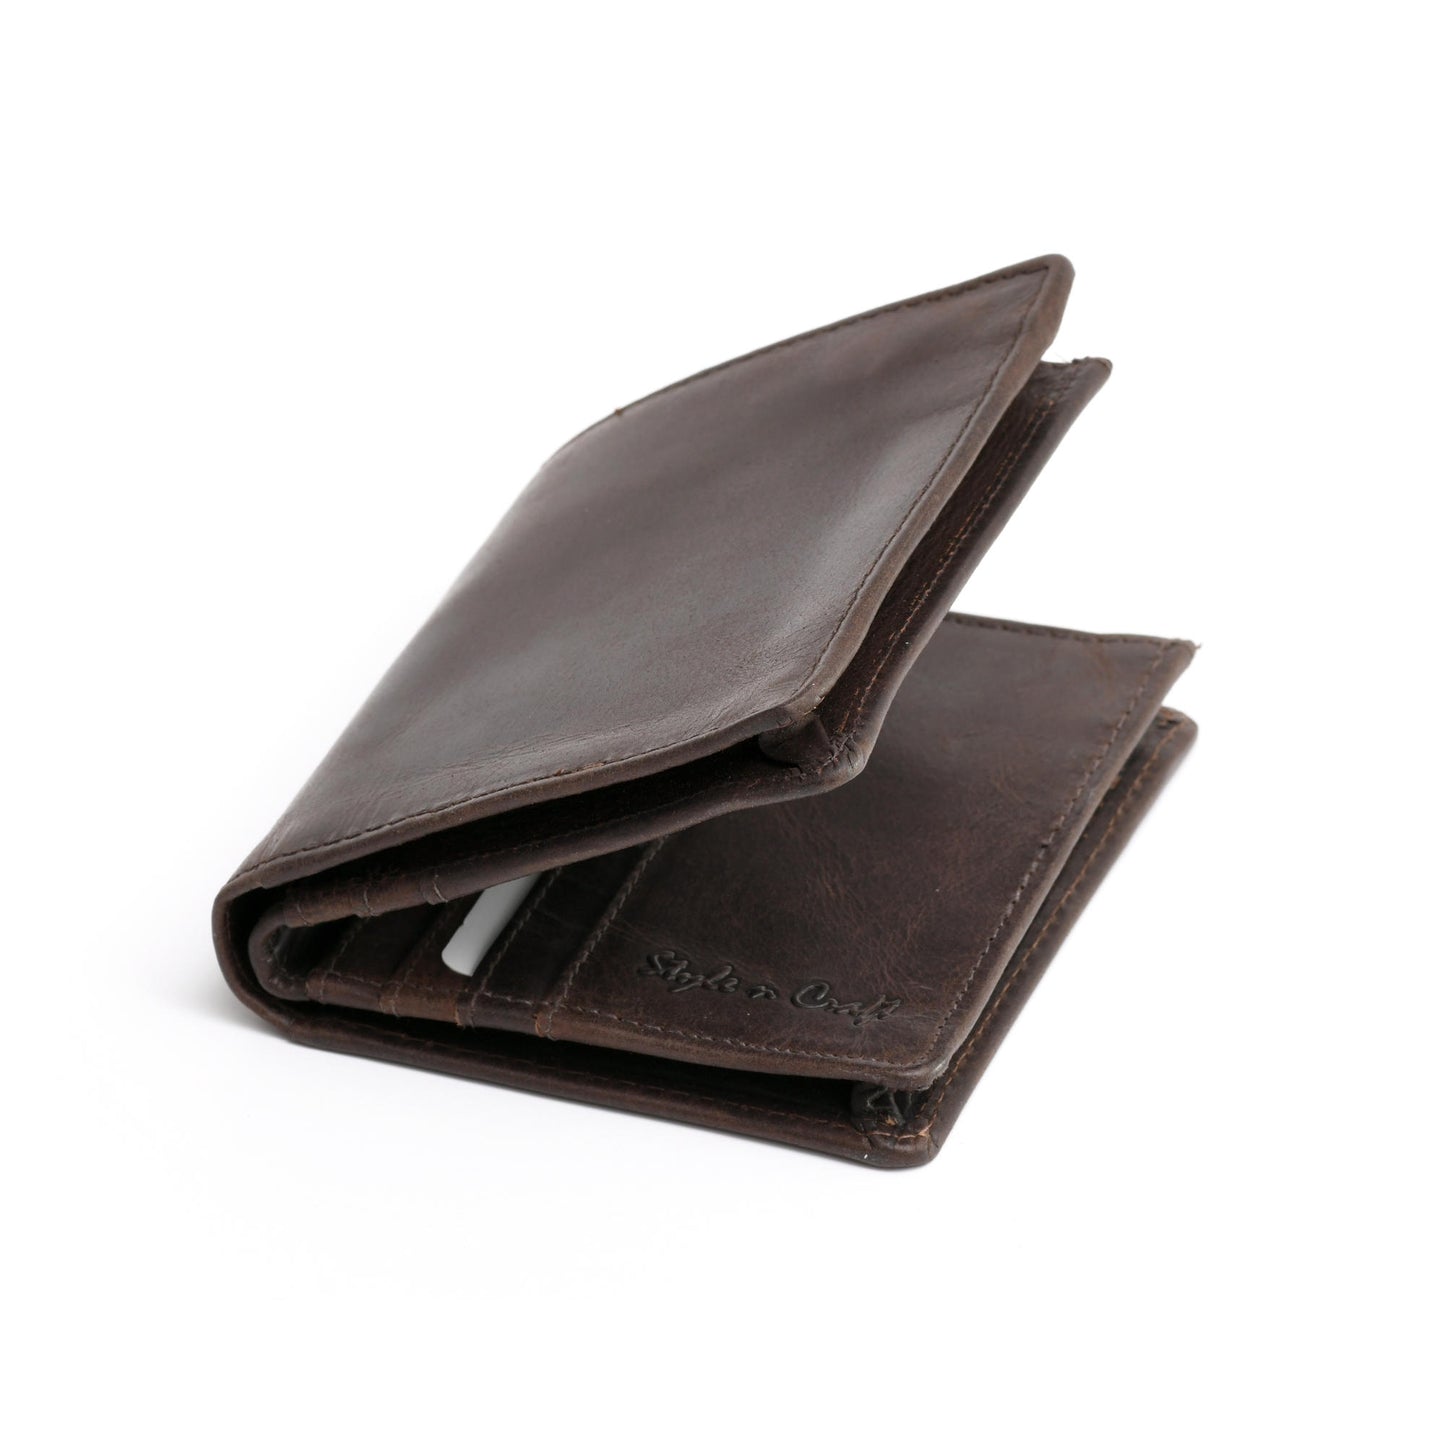 Style n Craft 391006 Bifold Hipster Leather Wallet with Back Zipper in Dark Brown Color - Closed Angled View Front